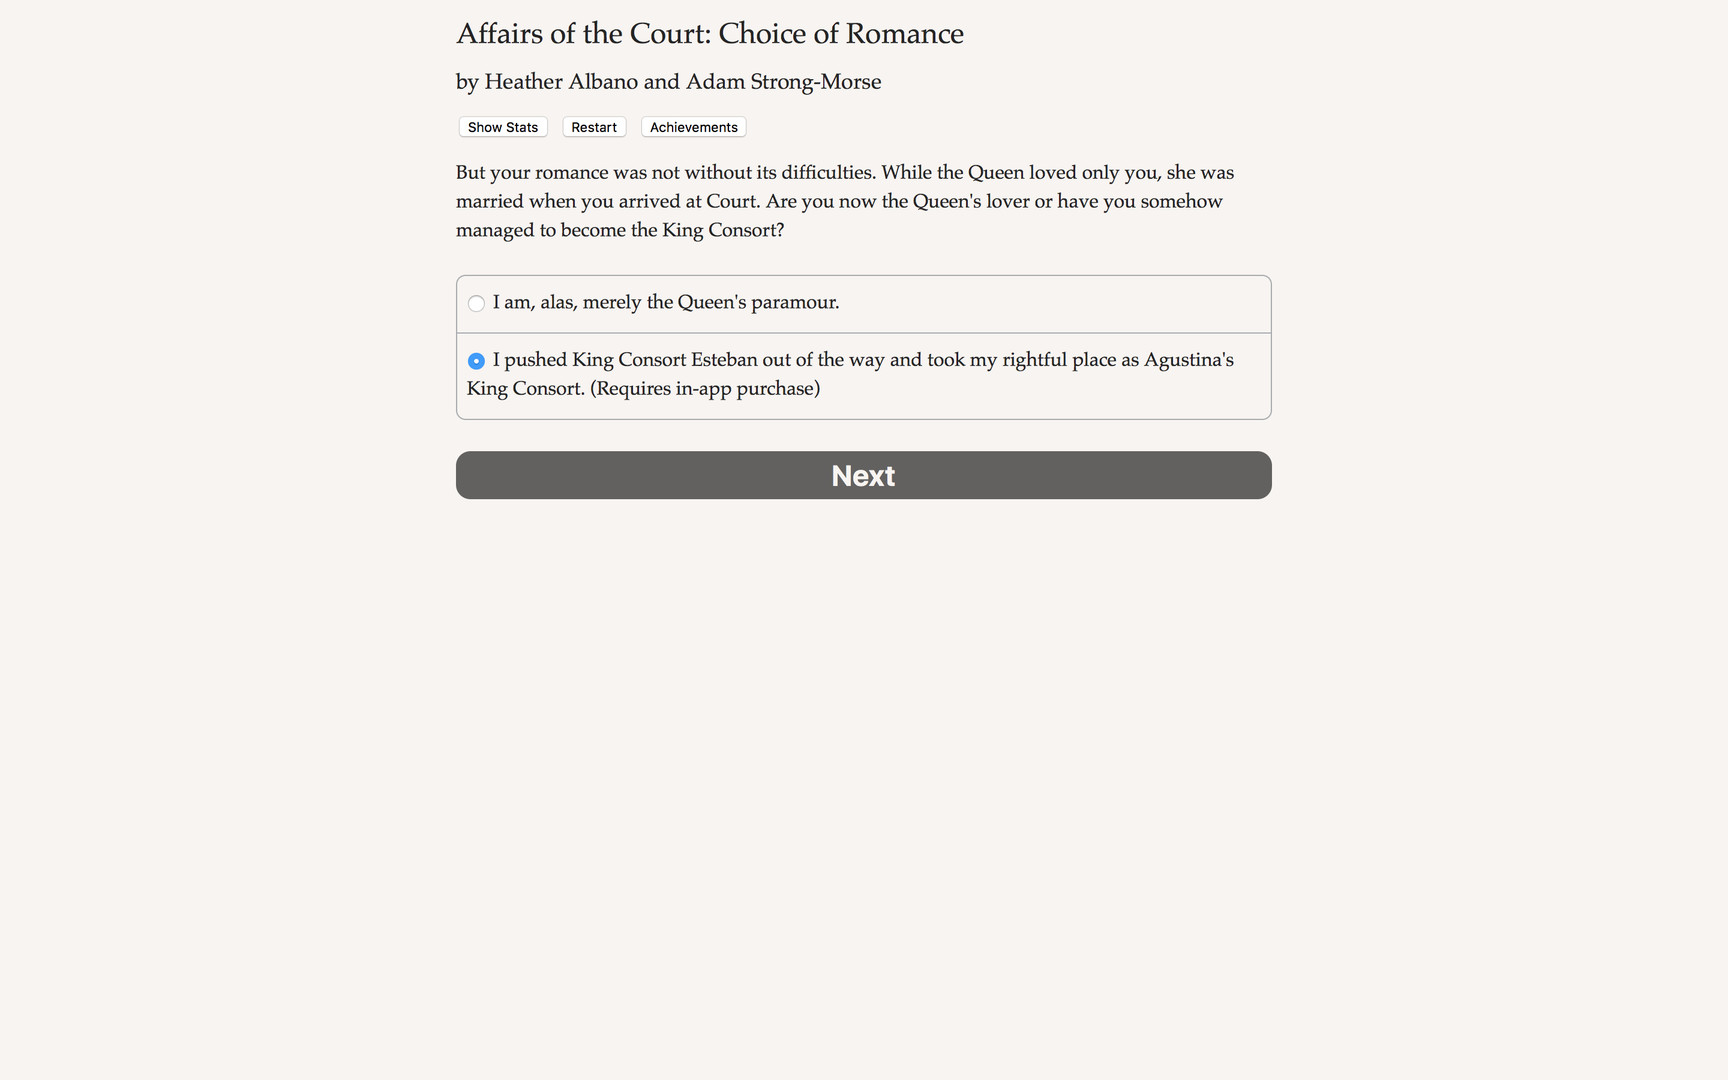 Affairs of the Court: Choice of Romance - Play as the Consort Featured Screenshot #1